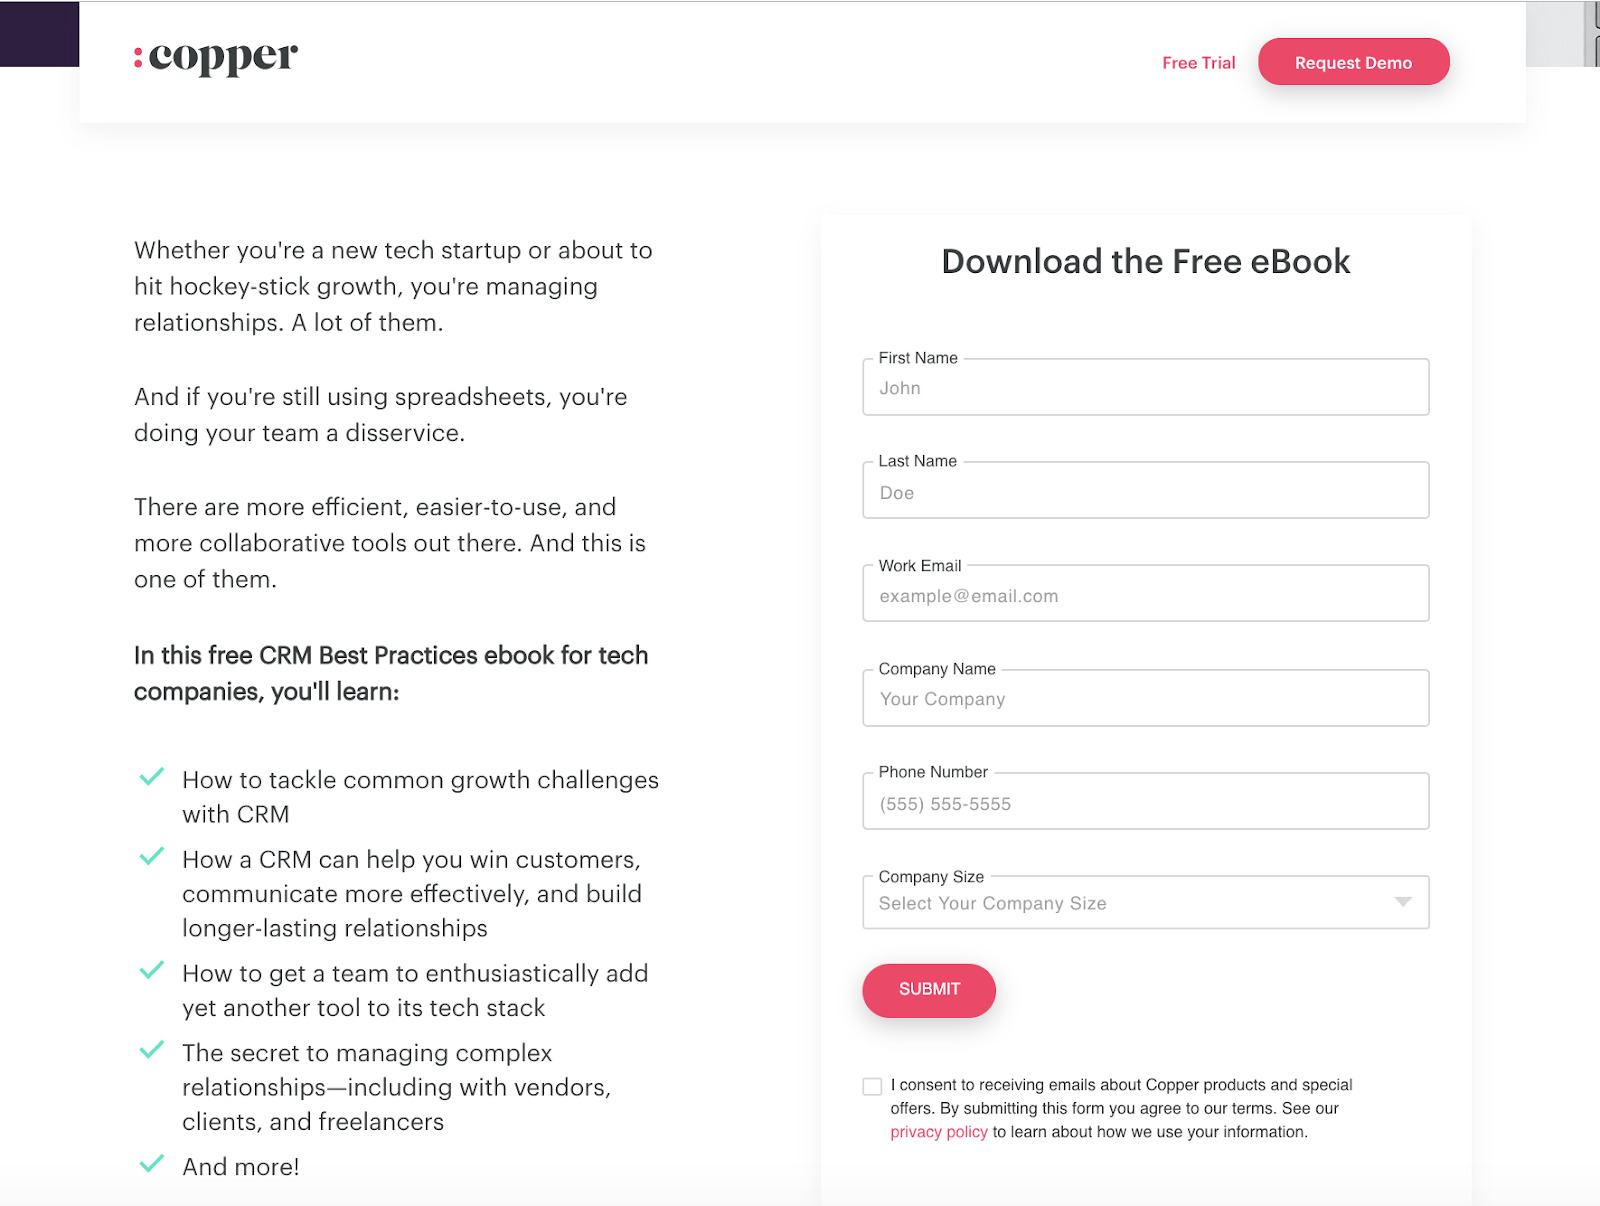 Landing page for Copper’s ebook, CRM Best Practices for Tech Companies